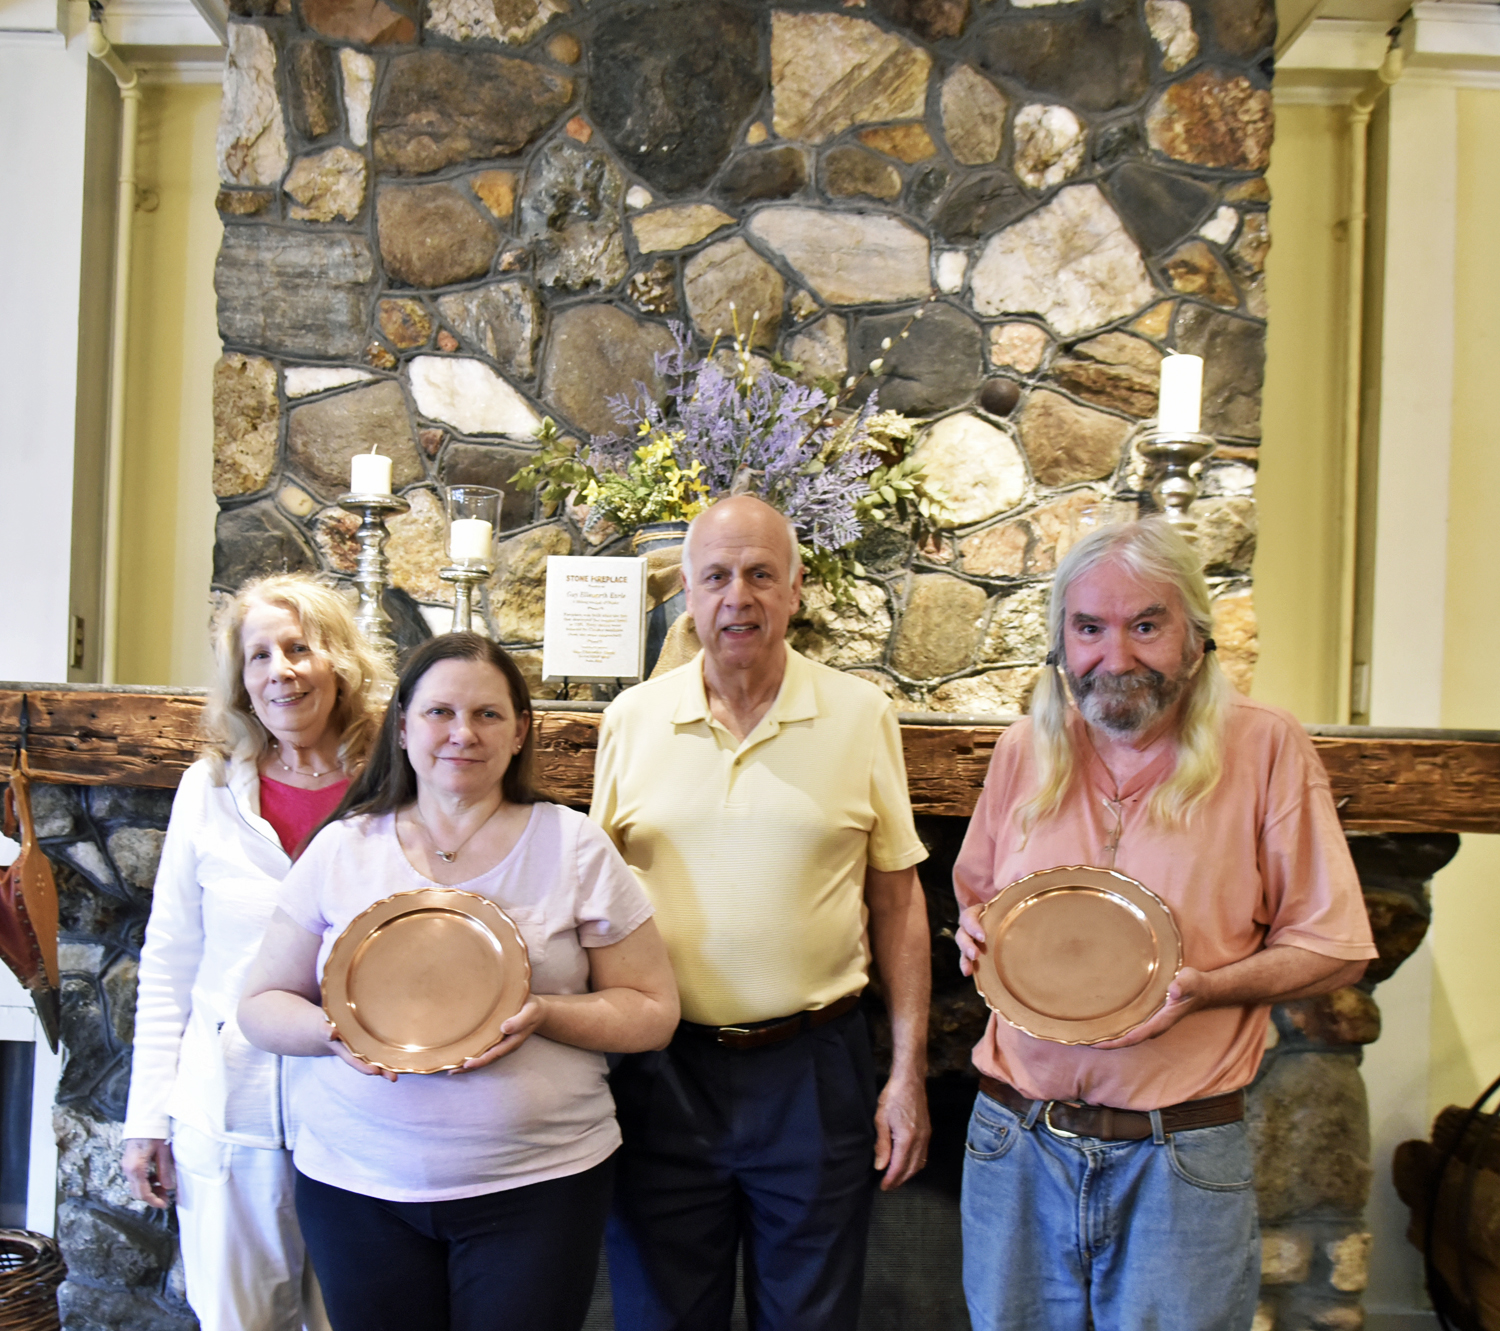 From left, Patricia Mackensen, the Fullerton Inn's General Manager Kim Bryan, Warren Mackensen and Ron Patch of the Chester Historical Society.